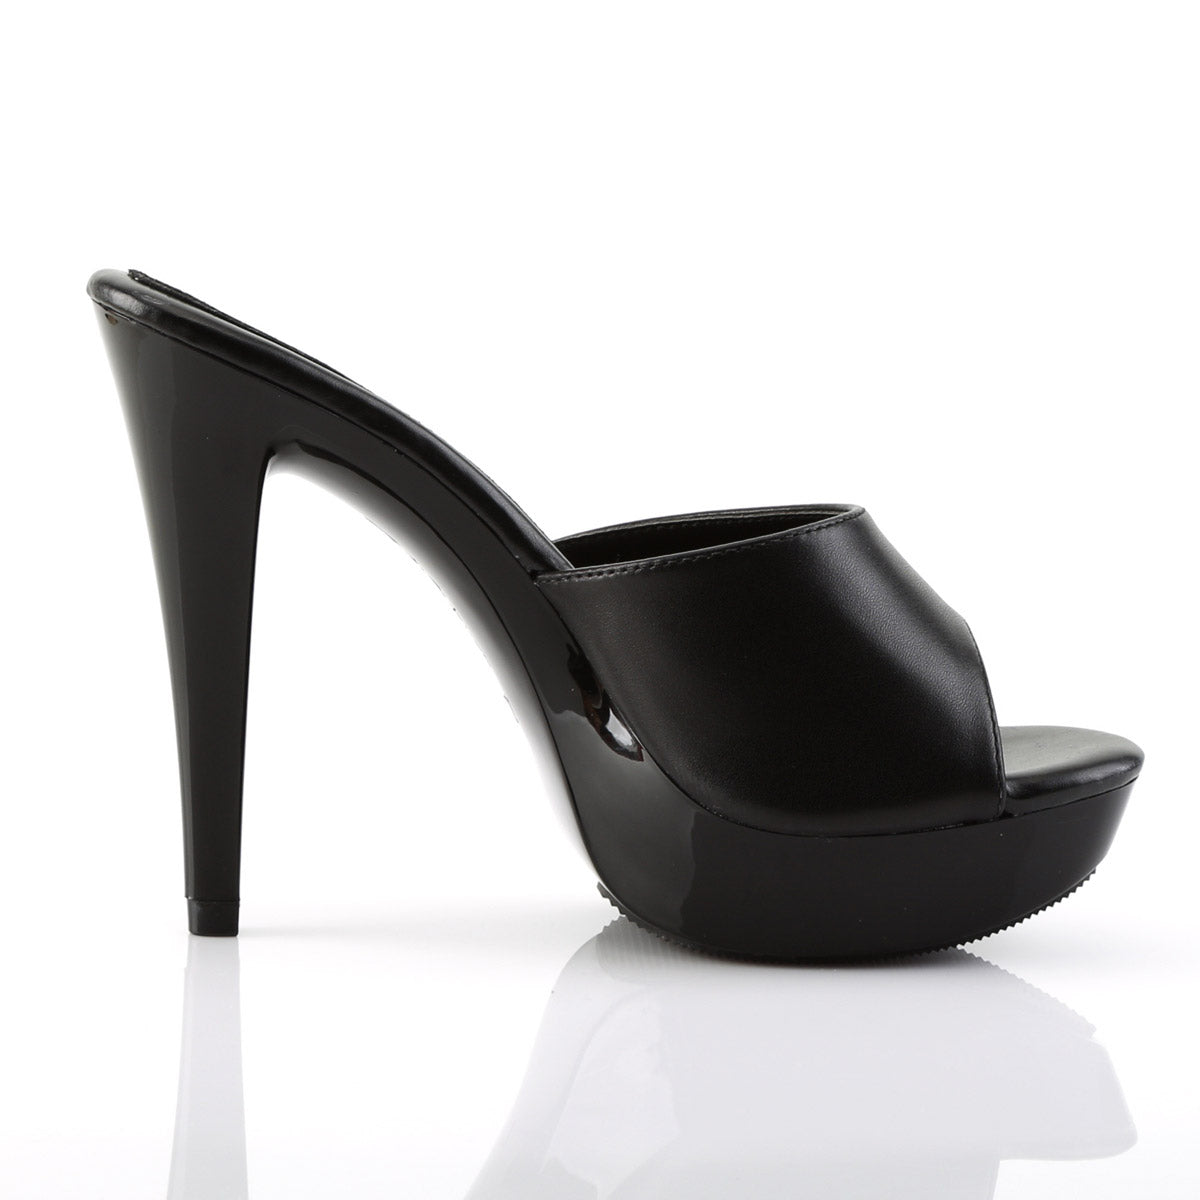 Sexy Leather Upper Platform Stiletto Slide Mule High Heels Shoes Pleaser Fabulicious COCKTAIL/501L